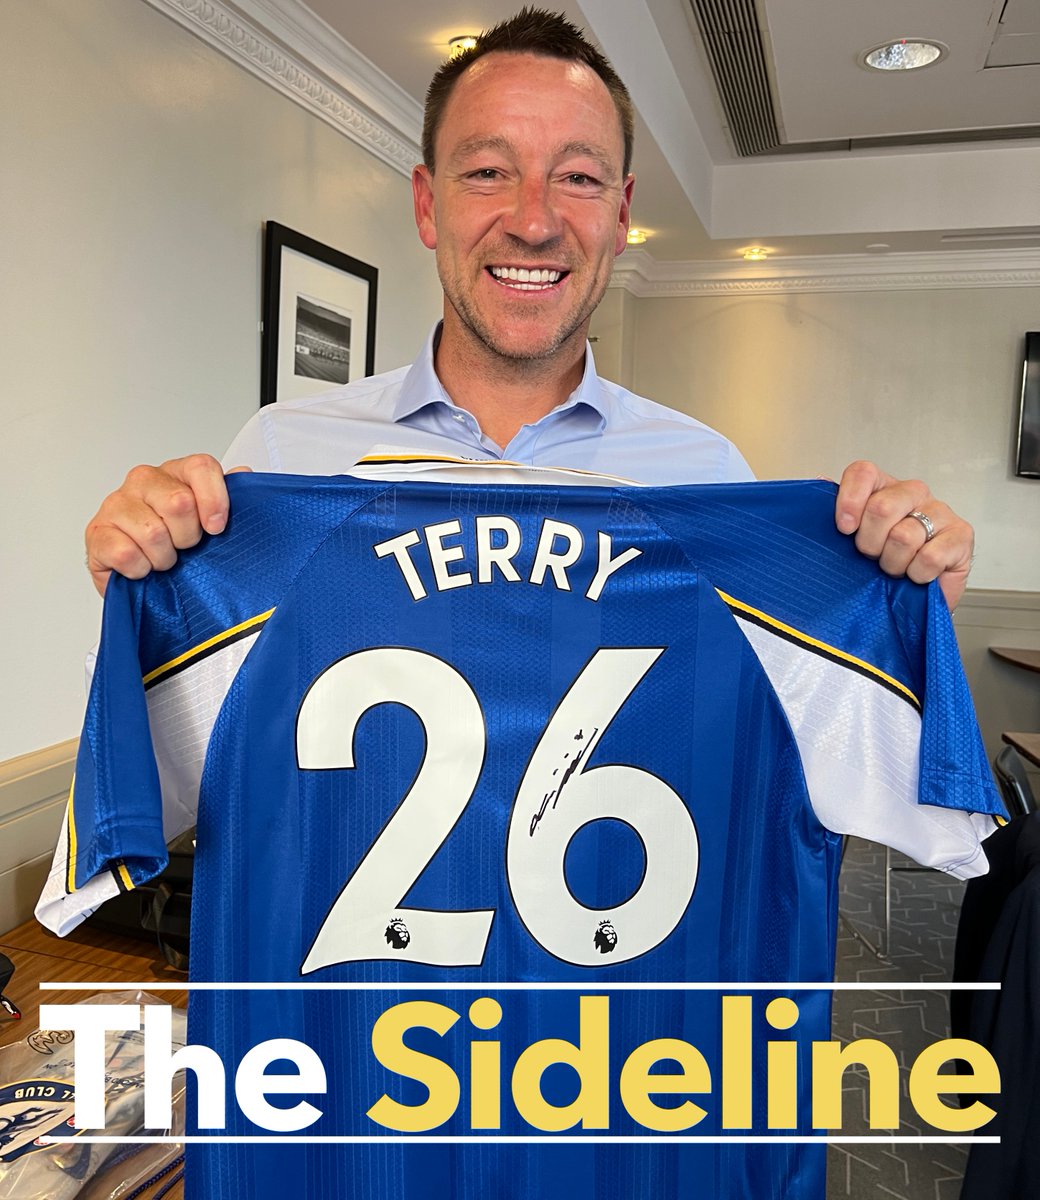 🚨We're giving away a signed John Terry shirt! For your chance to WIN, just sign up to the Chelsea Sideline Club's weekly newsletter, bringing you the latest in Chelsea culture direct to your inbox ➡️ chelseasideline.club